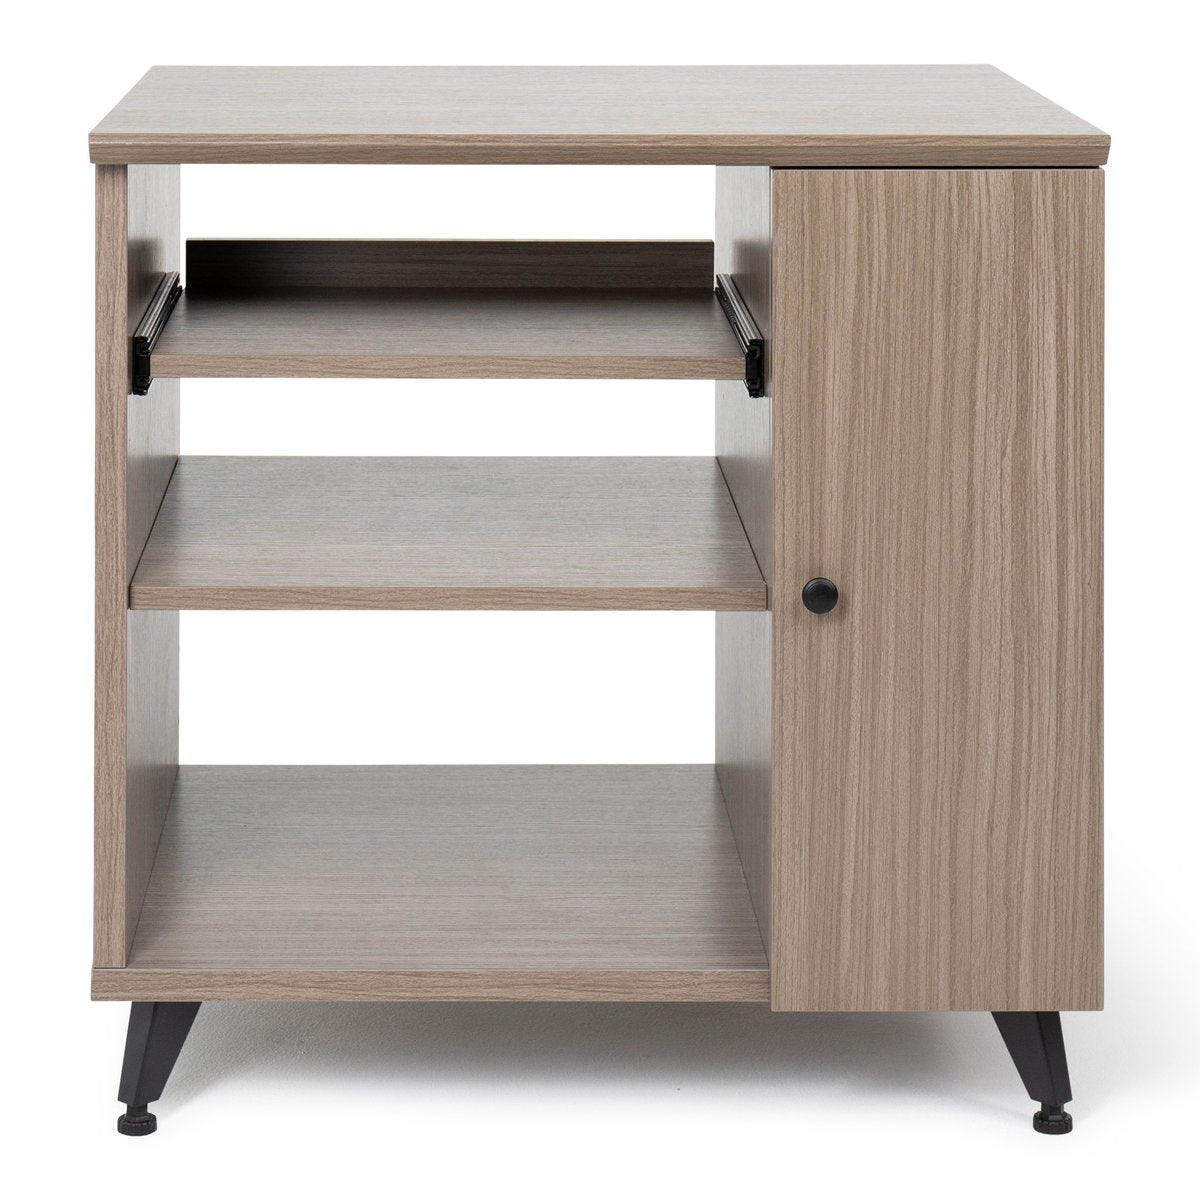 Elite Furniture Series Rolling Rack Sidecar Cabinet in Driftwood Grey Finish with Configurable Rack Space & Shelving